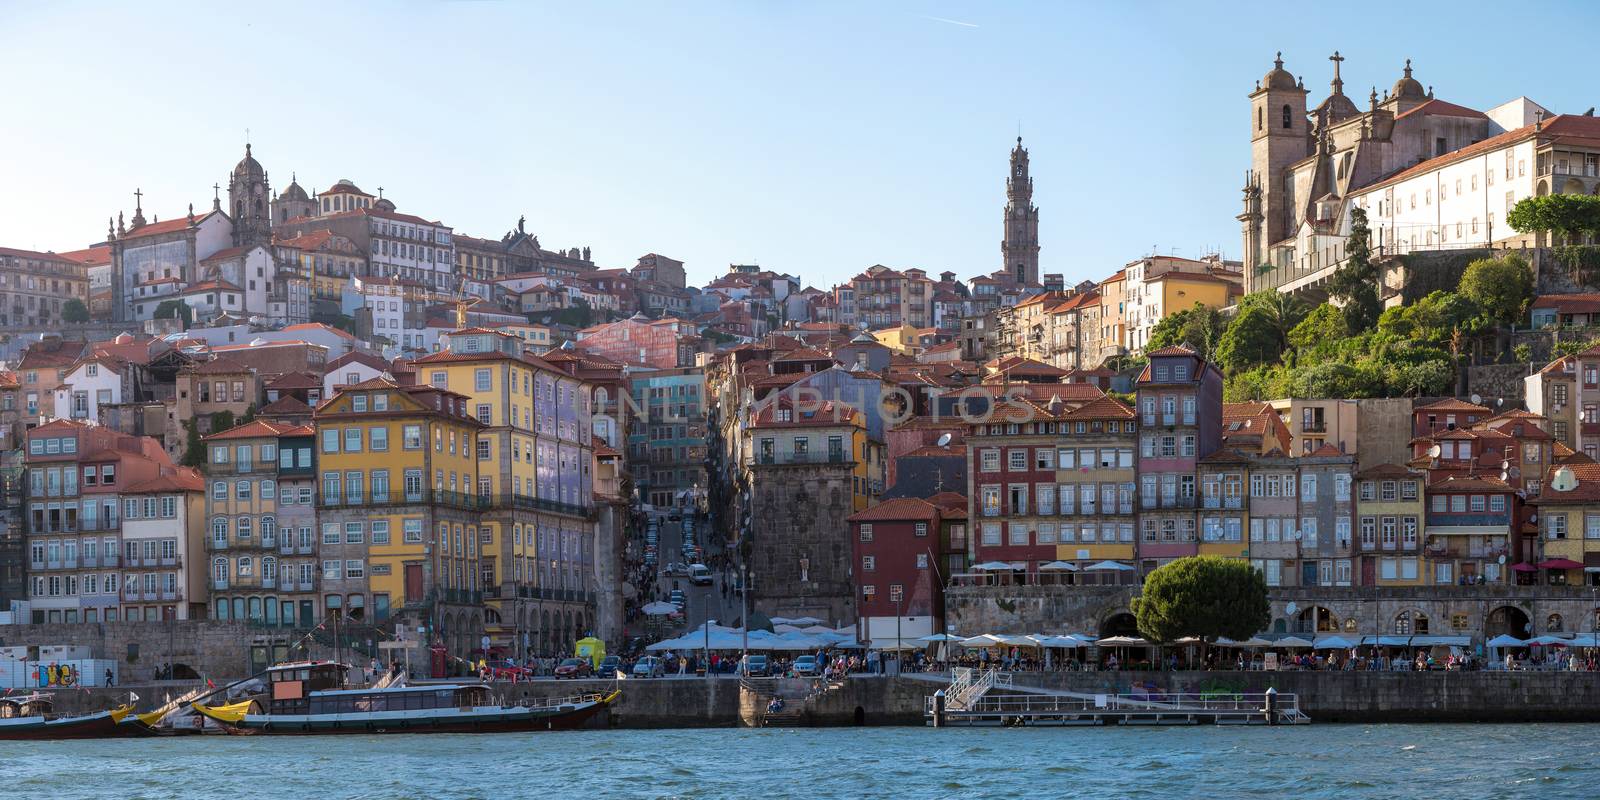 Panorama ancient Town of Porto along douro river from Gaia